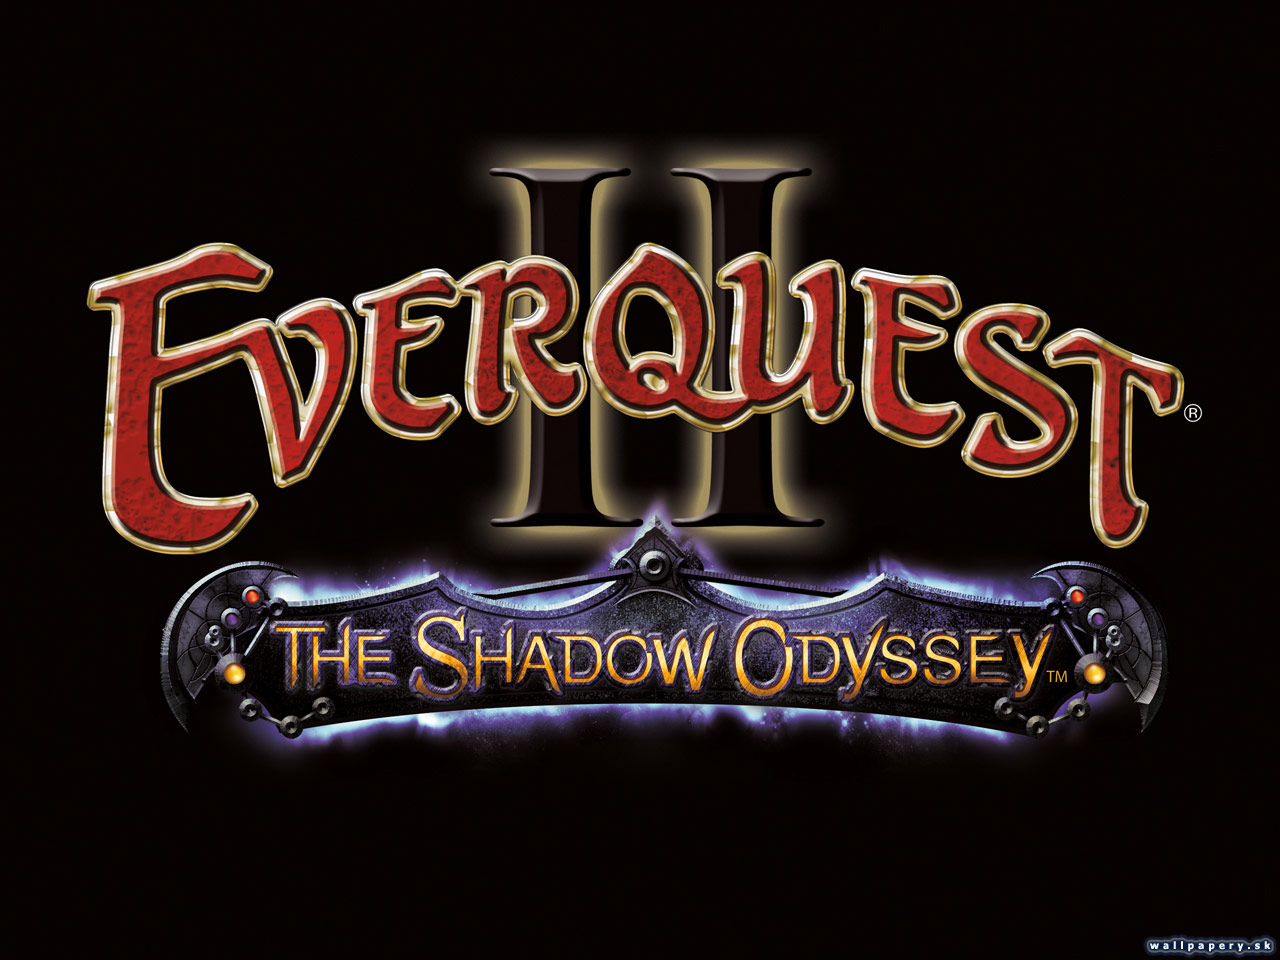 EverQuest 2: The Shadow Odyssey - wallpaper 2